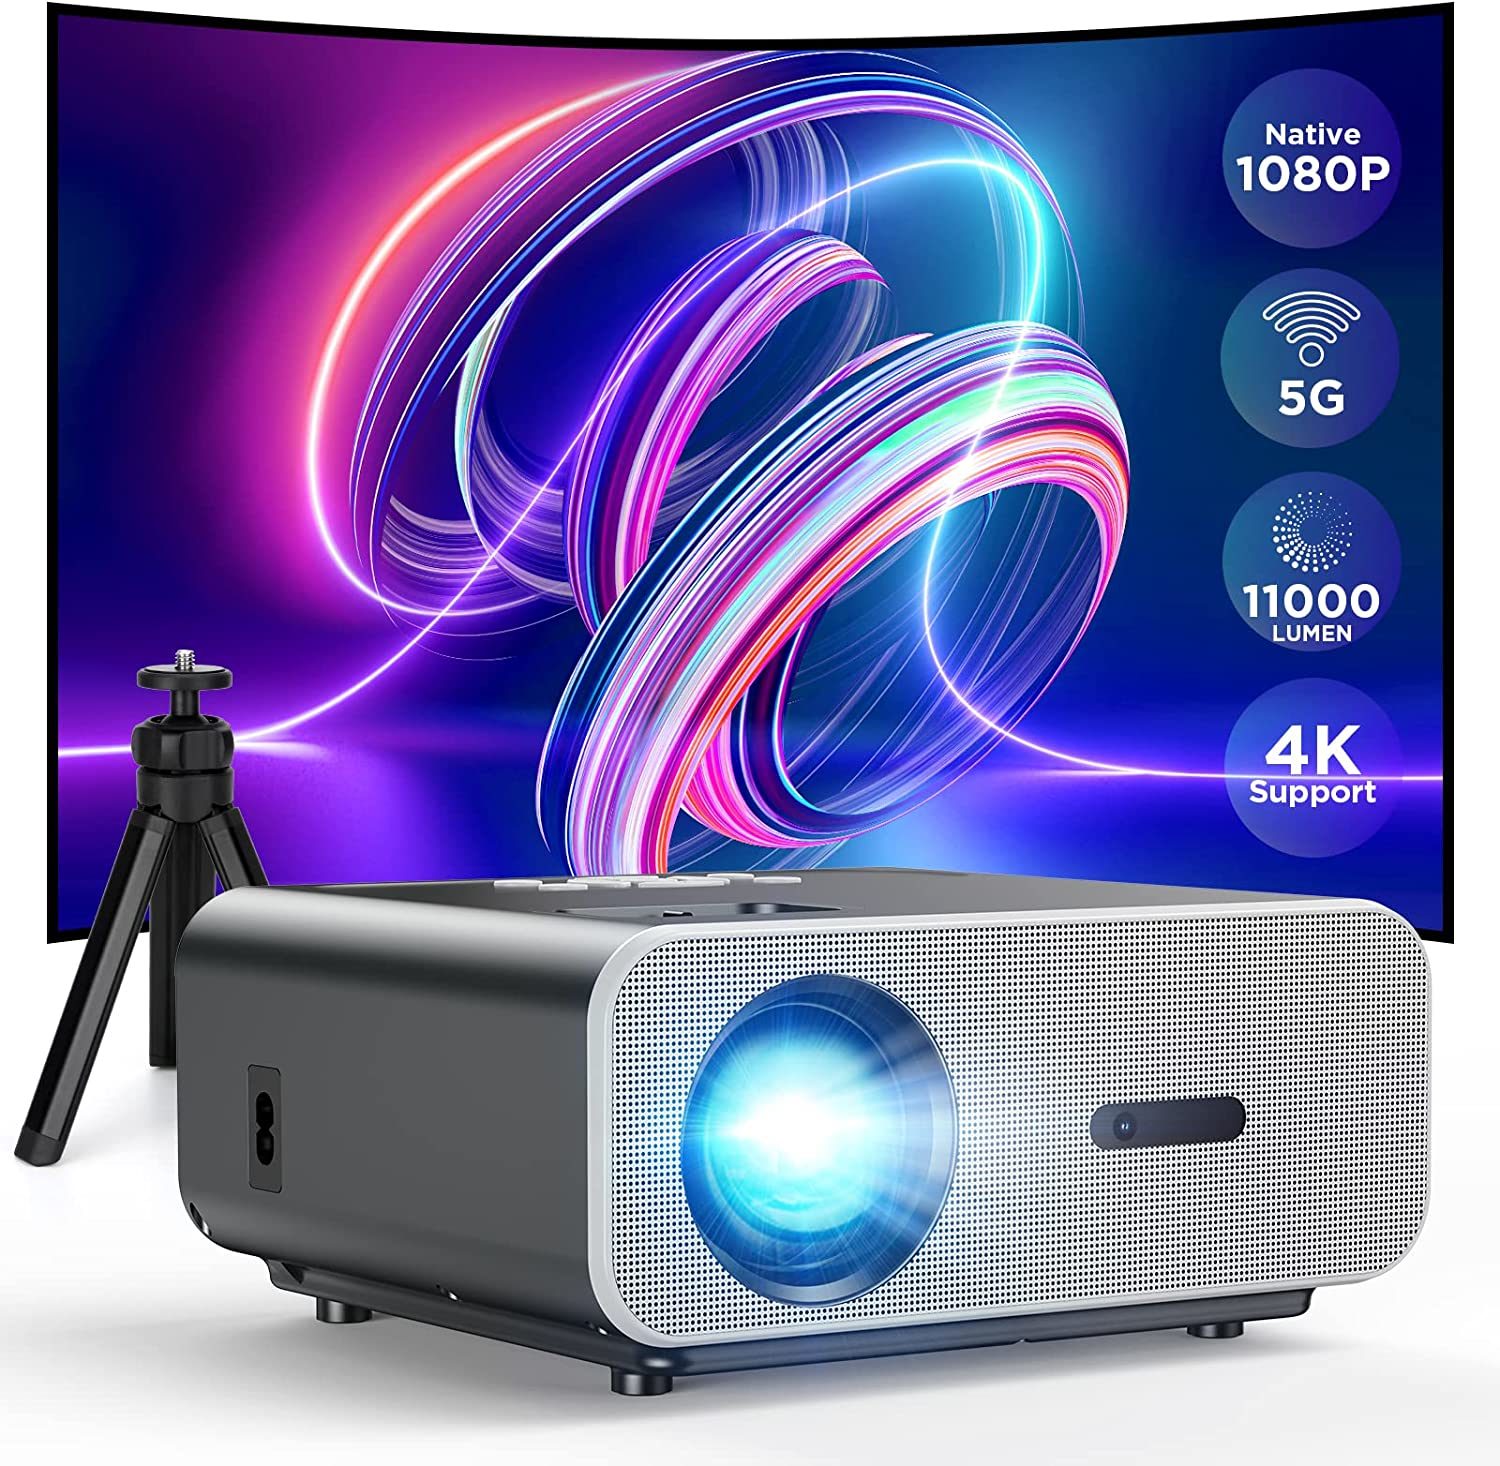 Projector with 5G WiFi and Bluetooth, VACASSO Native 1080P Portable Projector 4K Supported with Trip